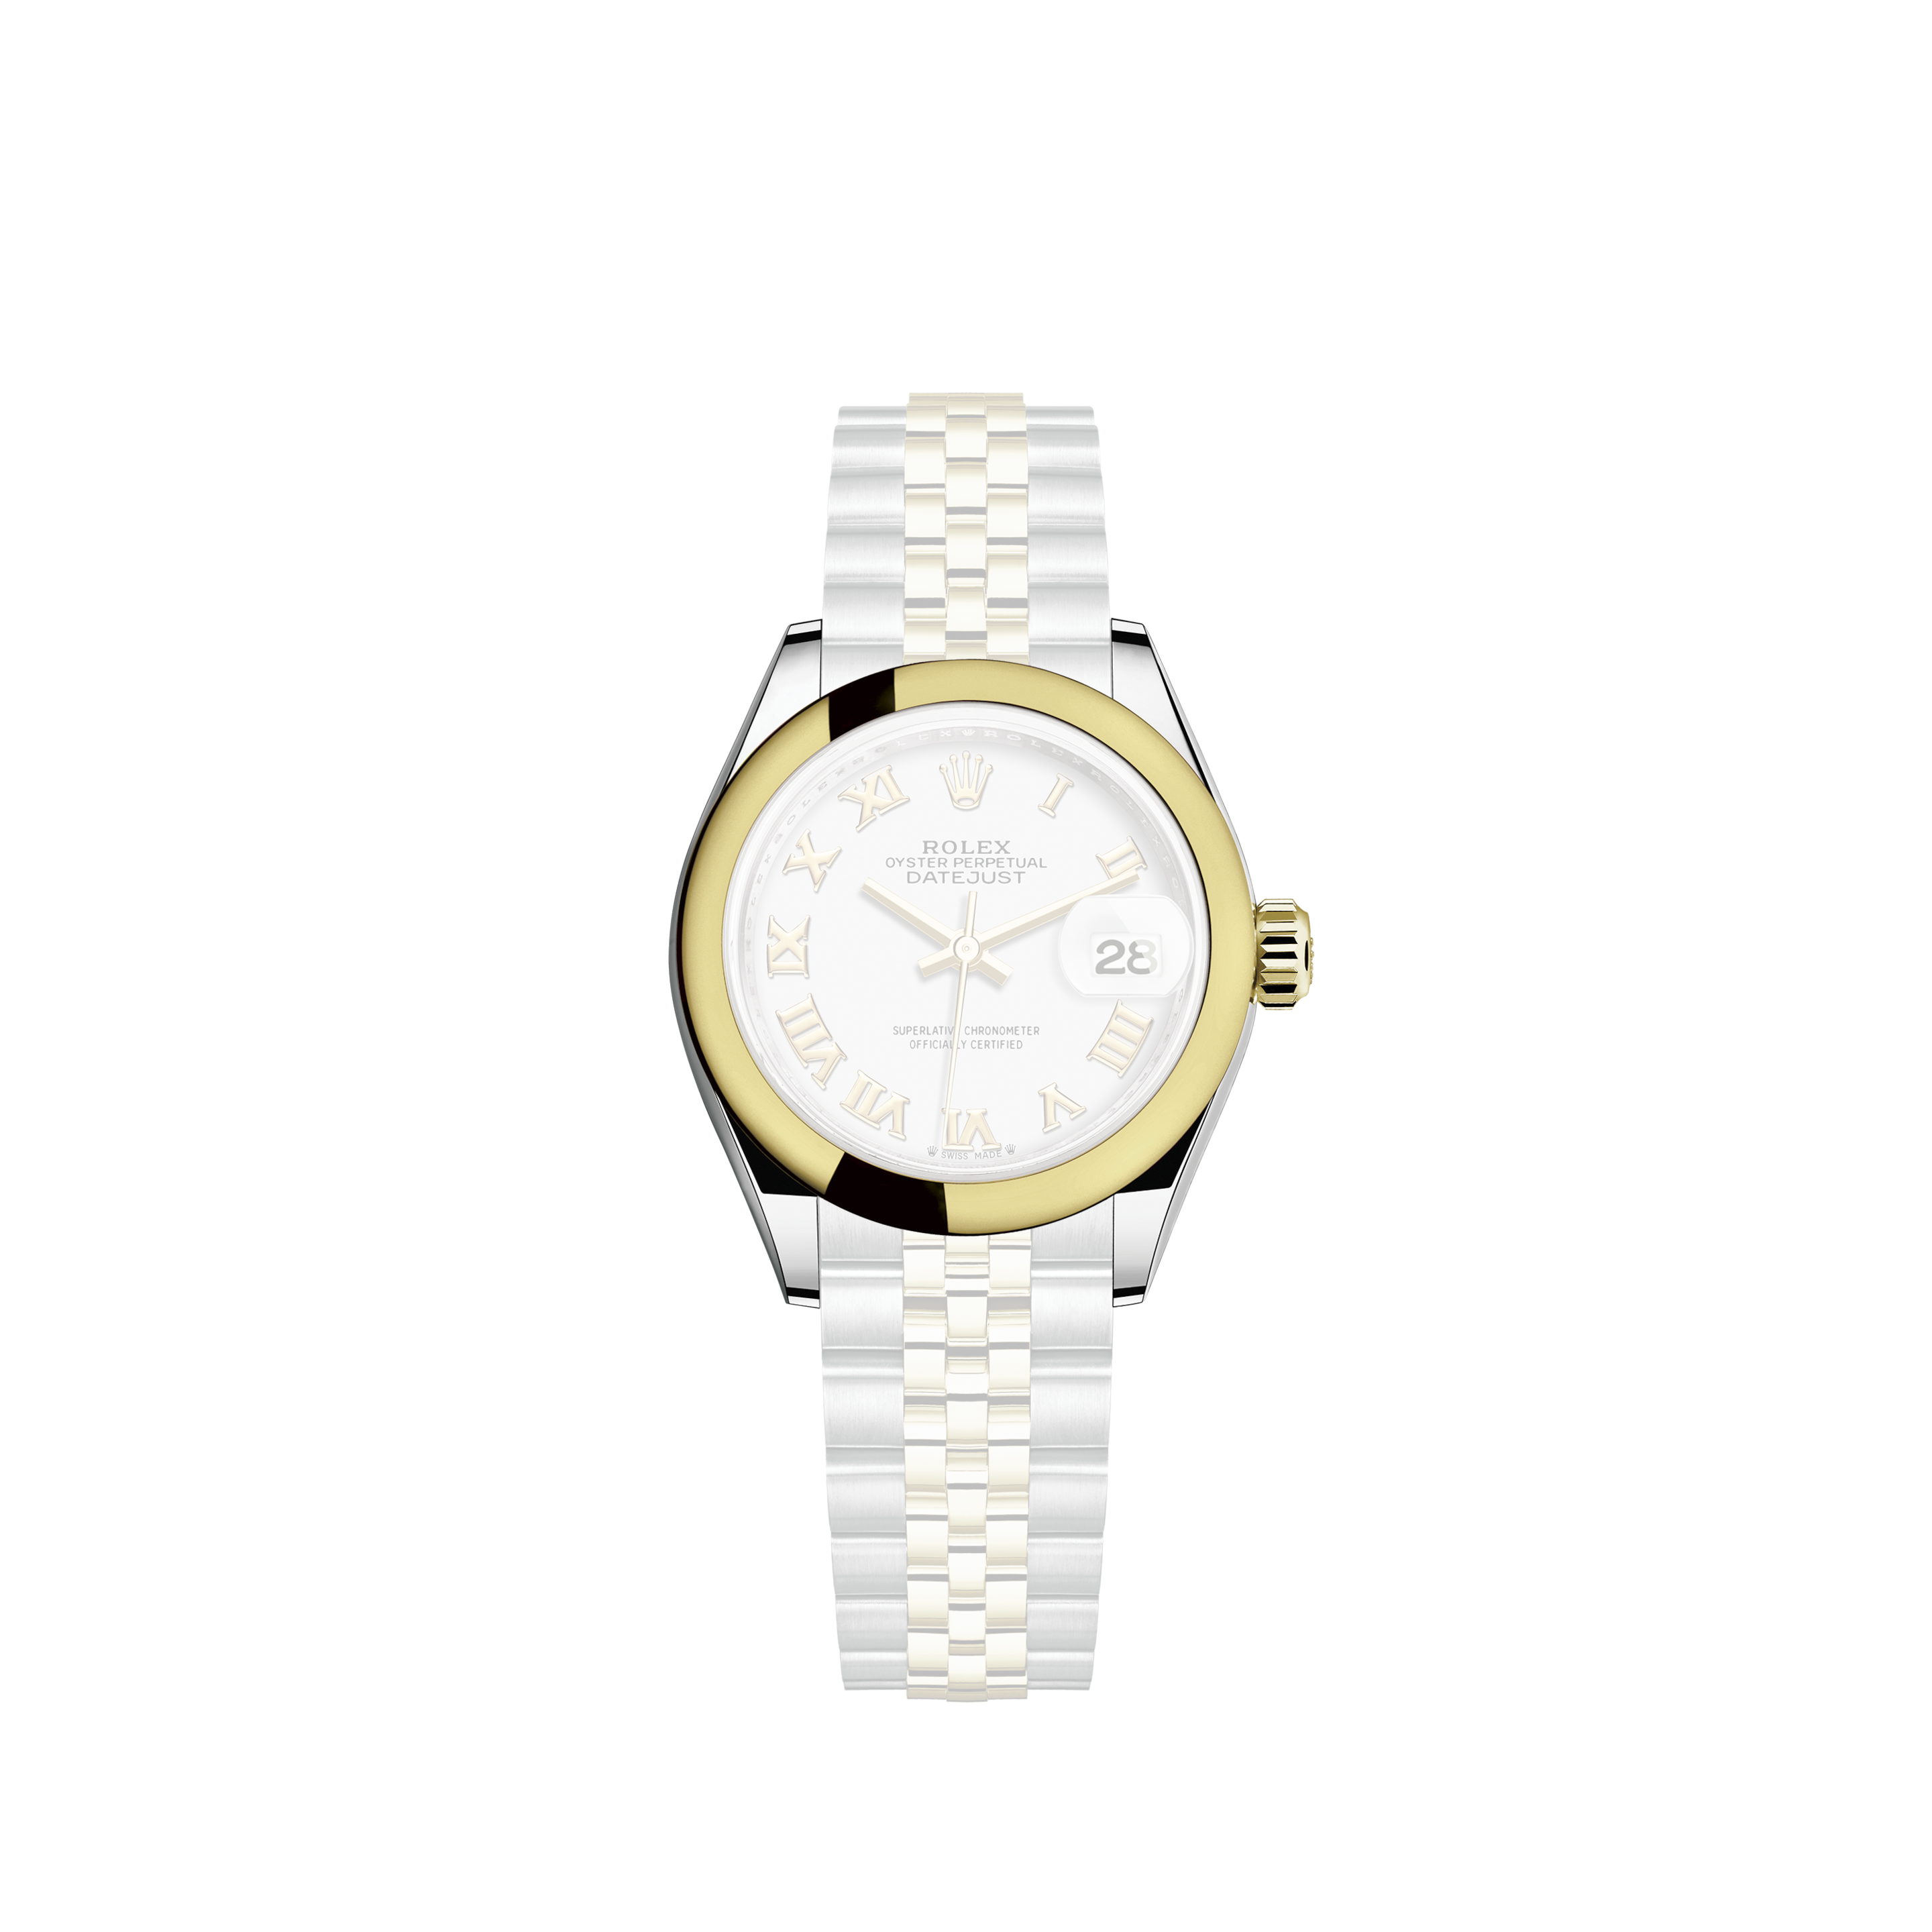 Rolex Datejust Steel Yellow Gold MOP Saphire Ladies Watch 179173 Box CardRolex Datejust Steel Yellow Gold Mother of Pearl Dial Mens Watch 16233